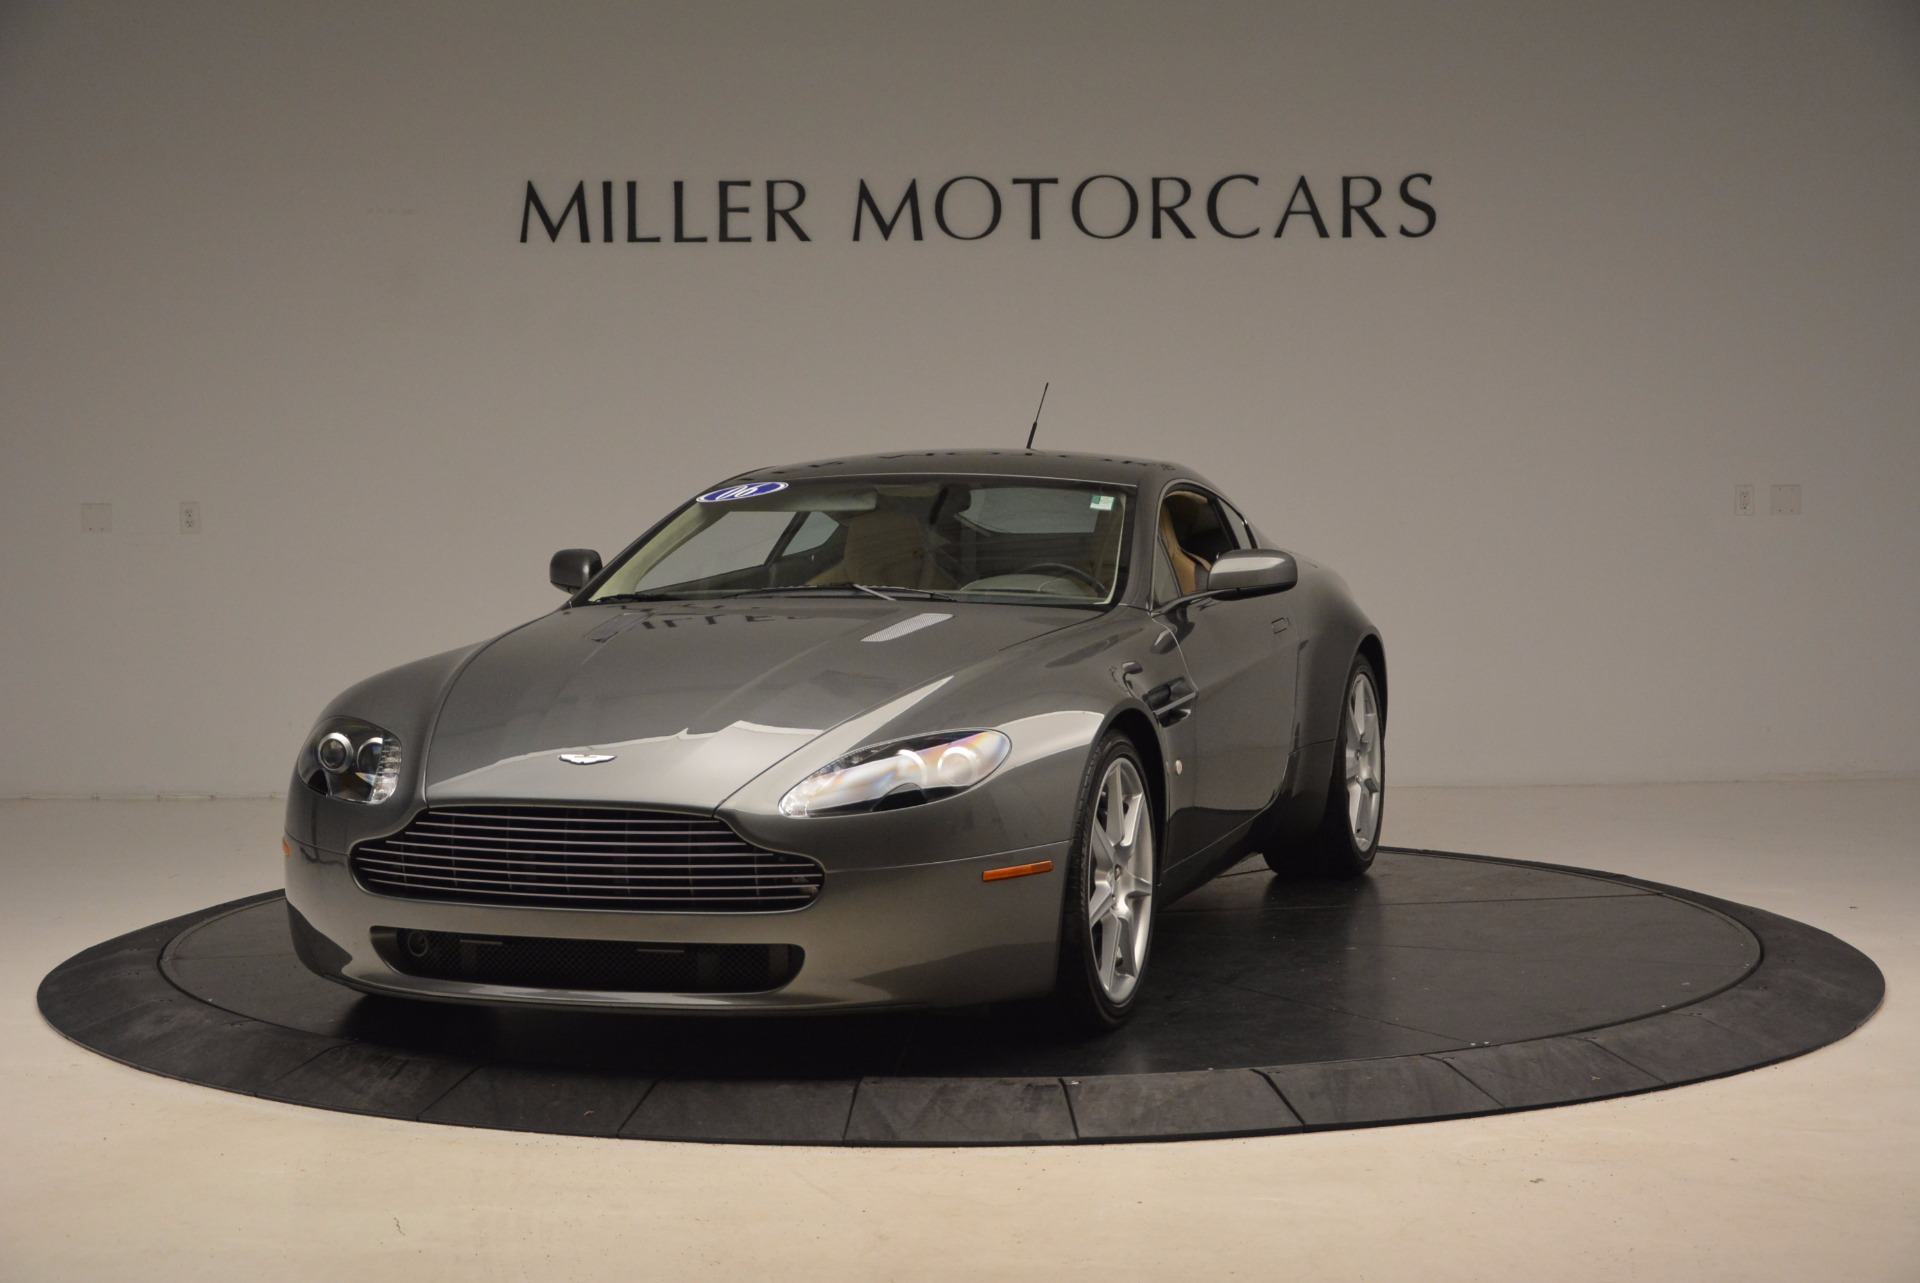 Used 2006 Aston Martin V8 Vantage for sale Sold at Alfa Romeo of Greenwich in Greenwich CT 06830 1